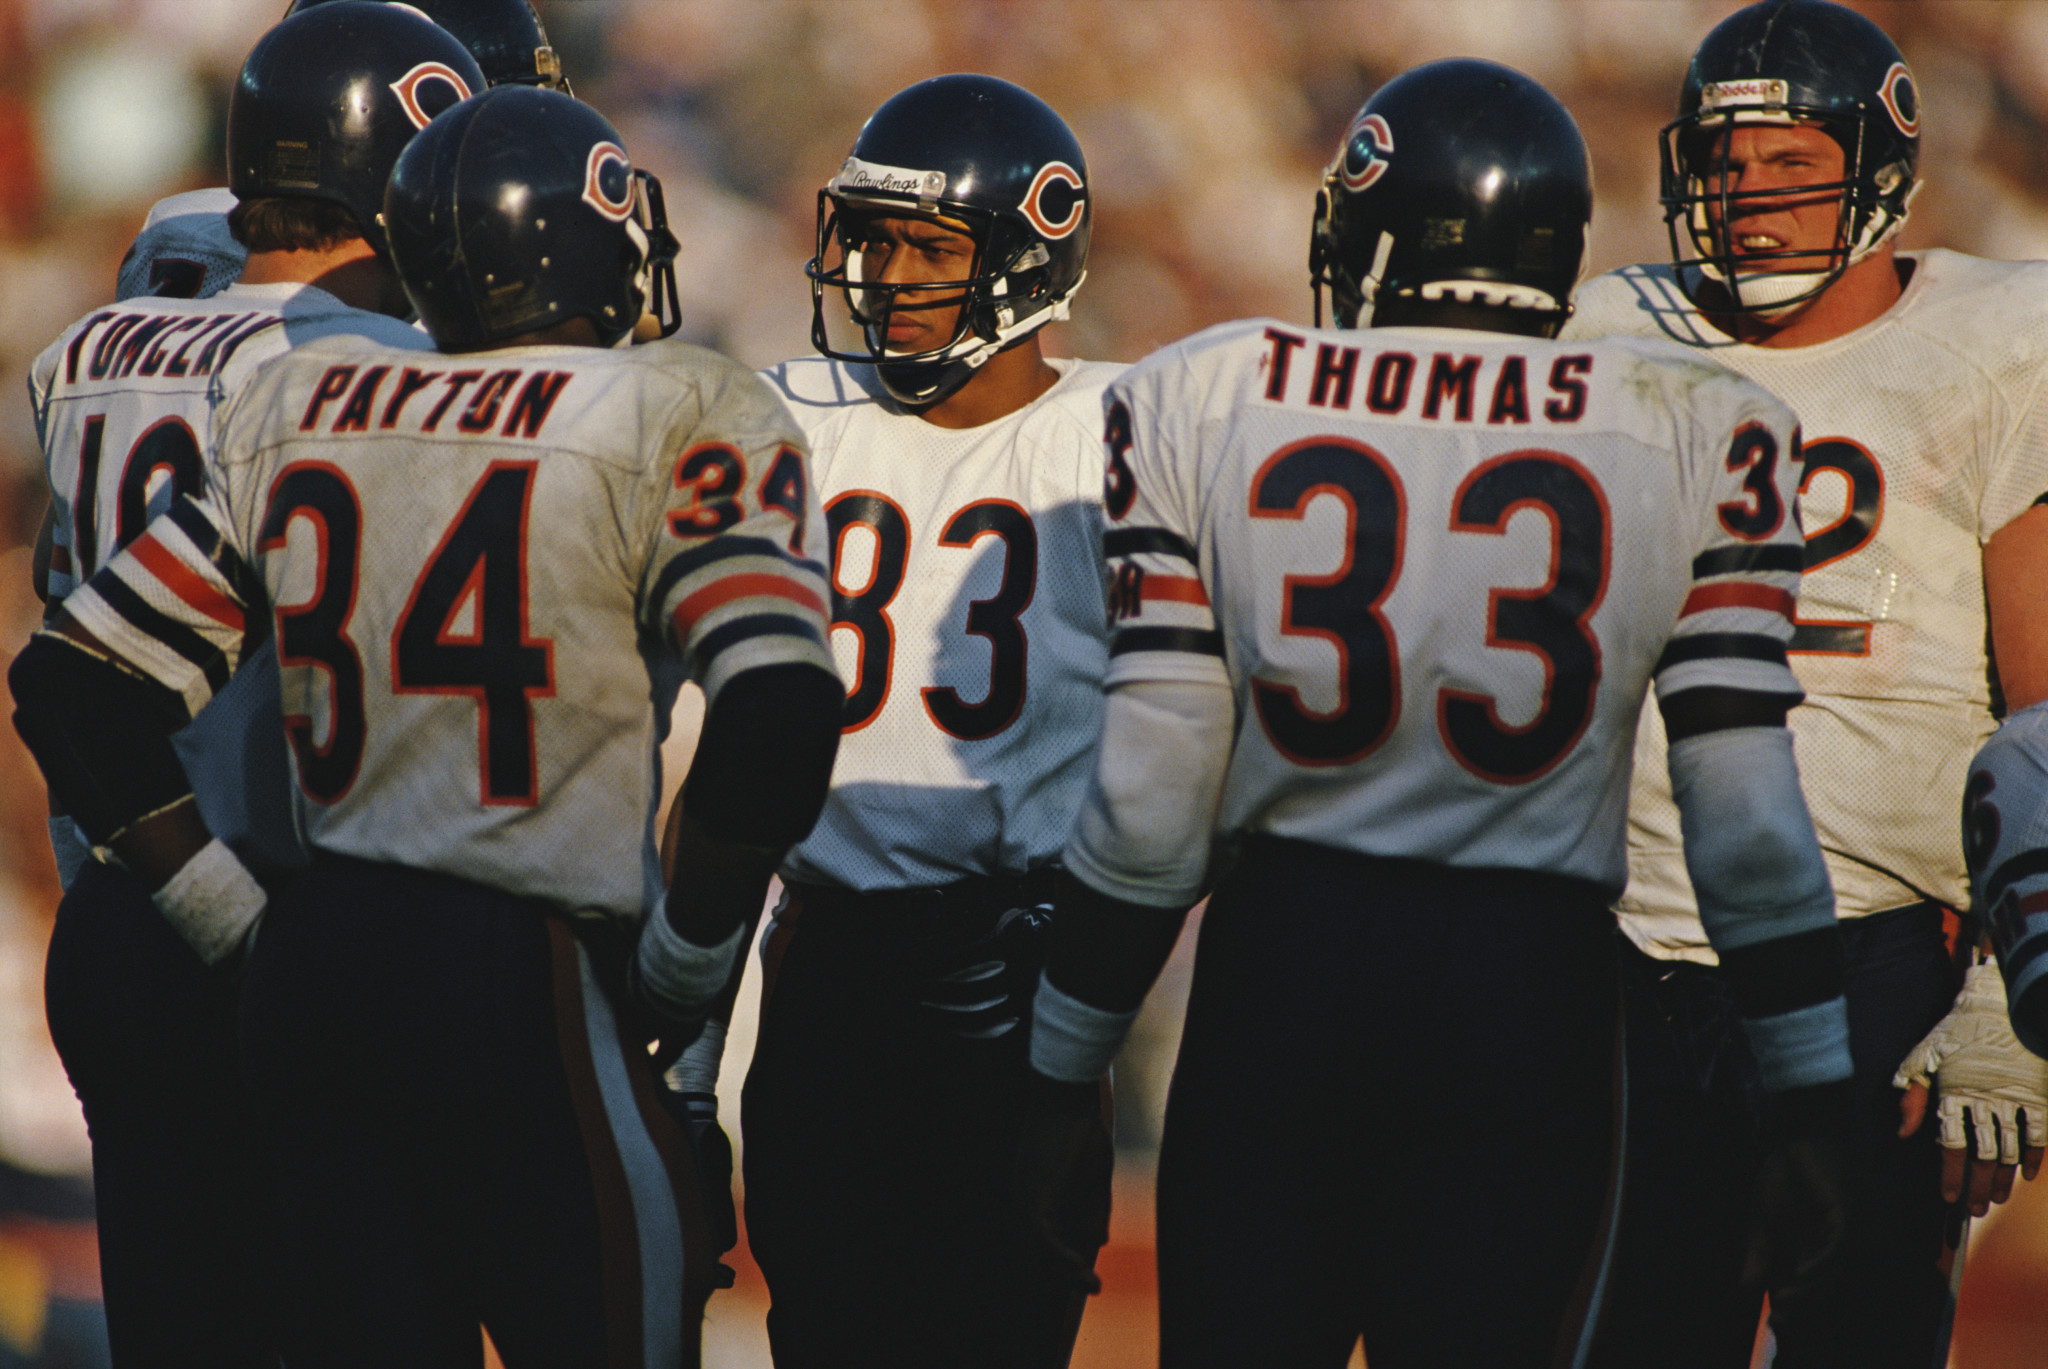 Willie Gault, pictured centre, was unable to compete at the 1980 Olympics because of the US boycott, but won world relay gold in 1983 and helped the Chicago Bears win the Super Bowl in 1985 ©Getty Images